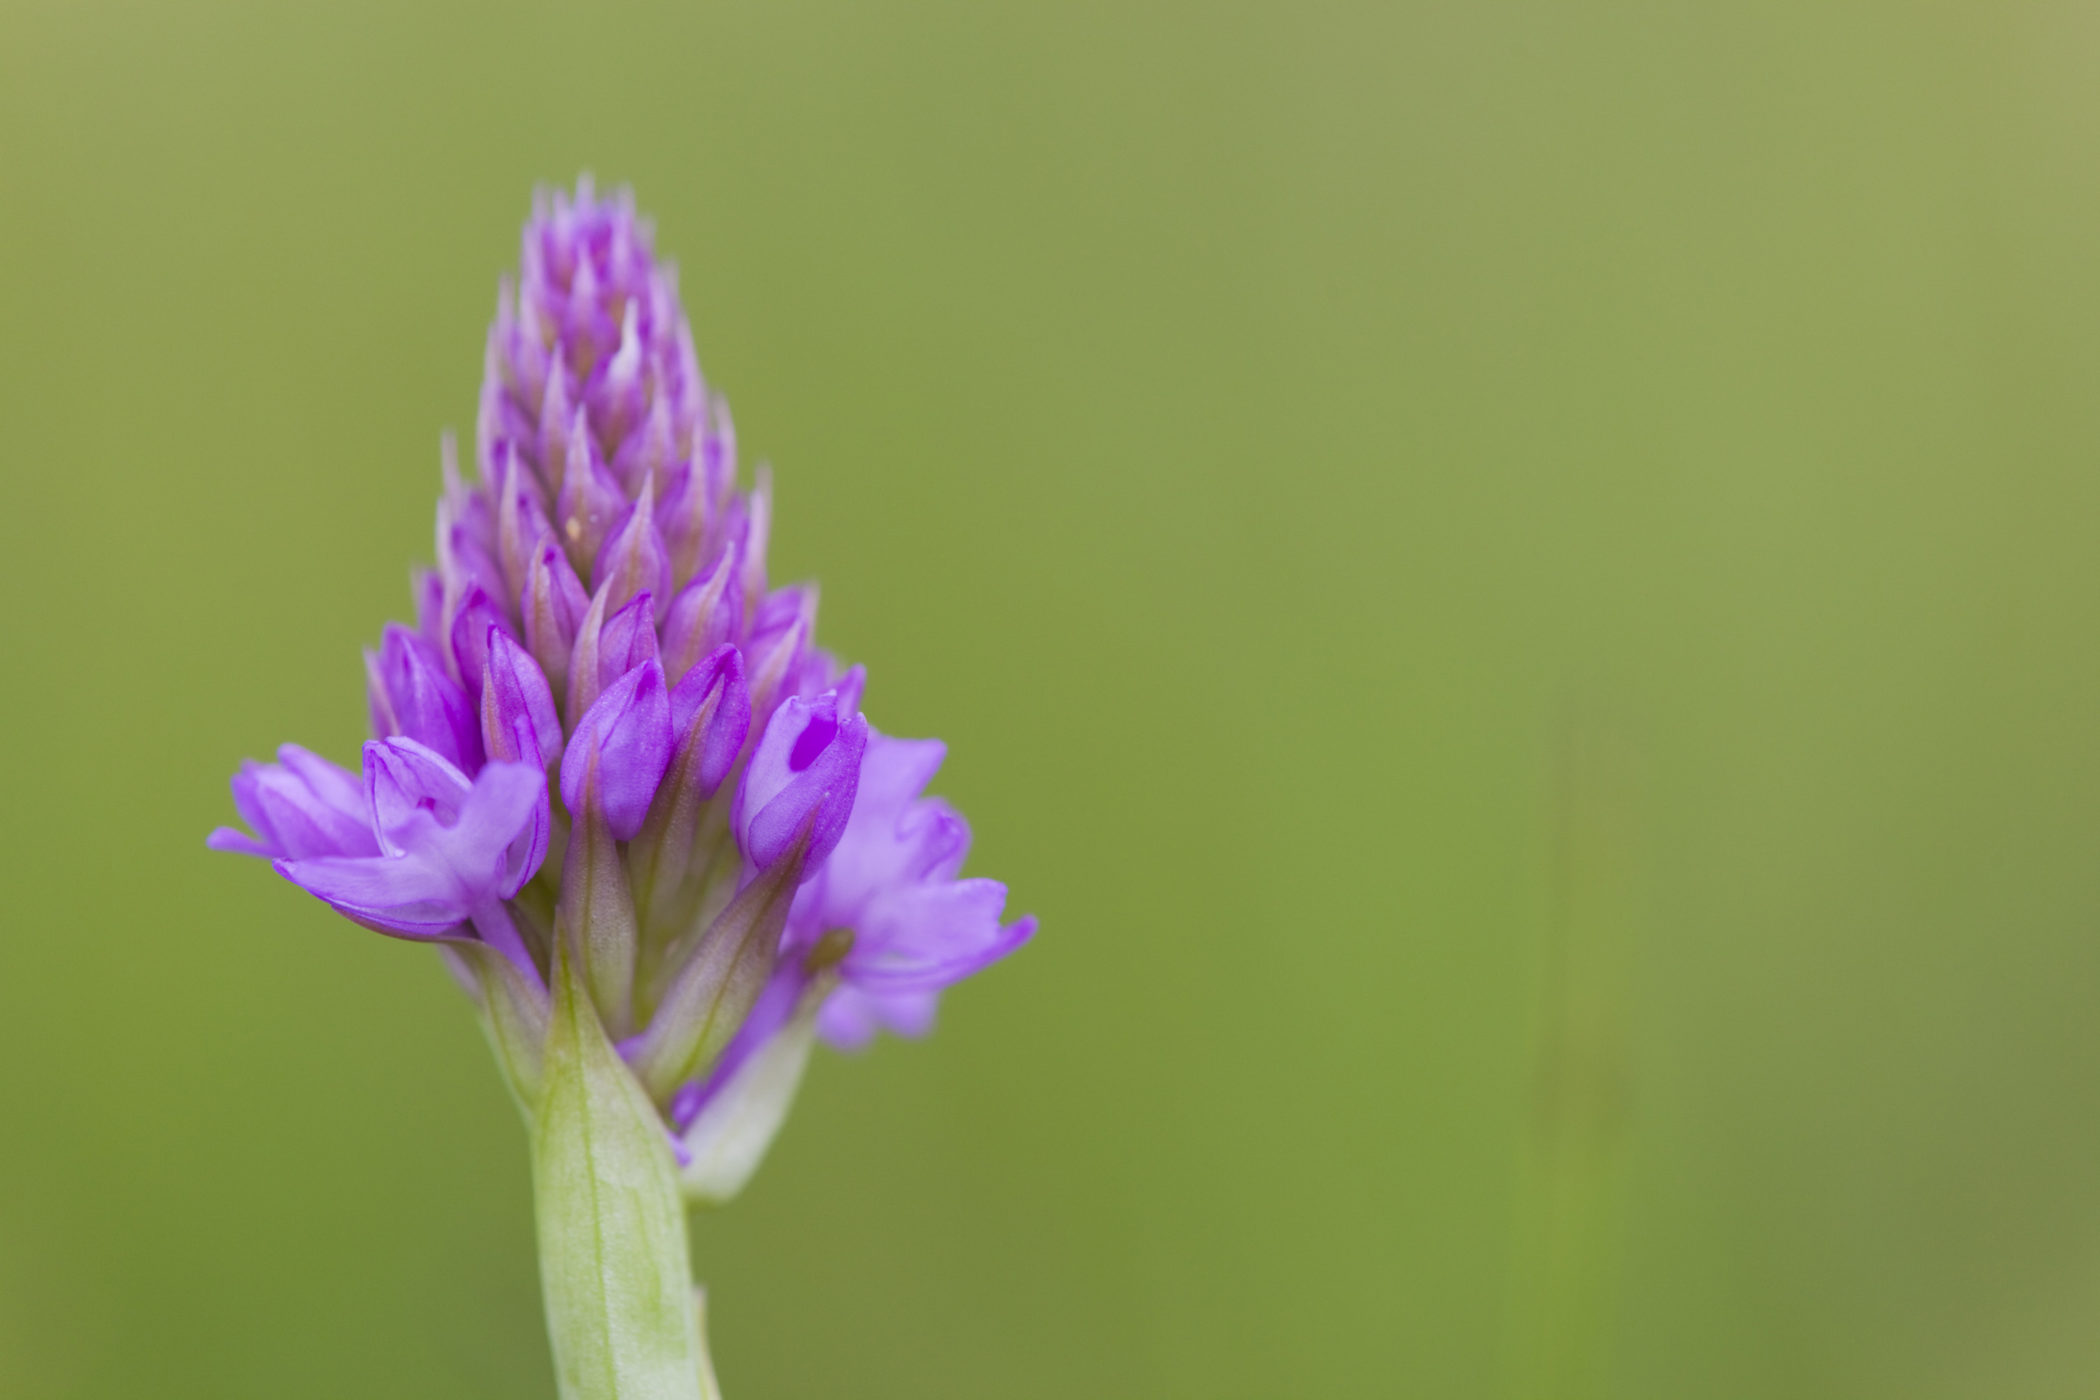 Pyramidal orchid is conical in shape, particularly when it first begins to open out. Credit: David Chapman